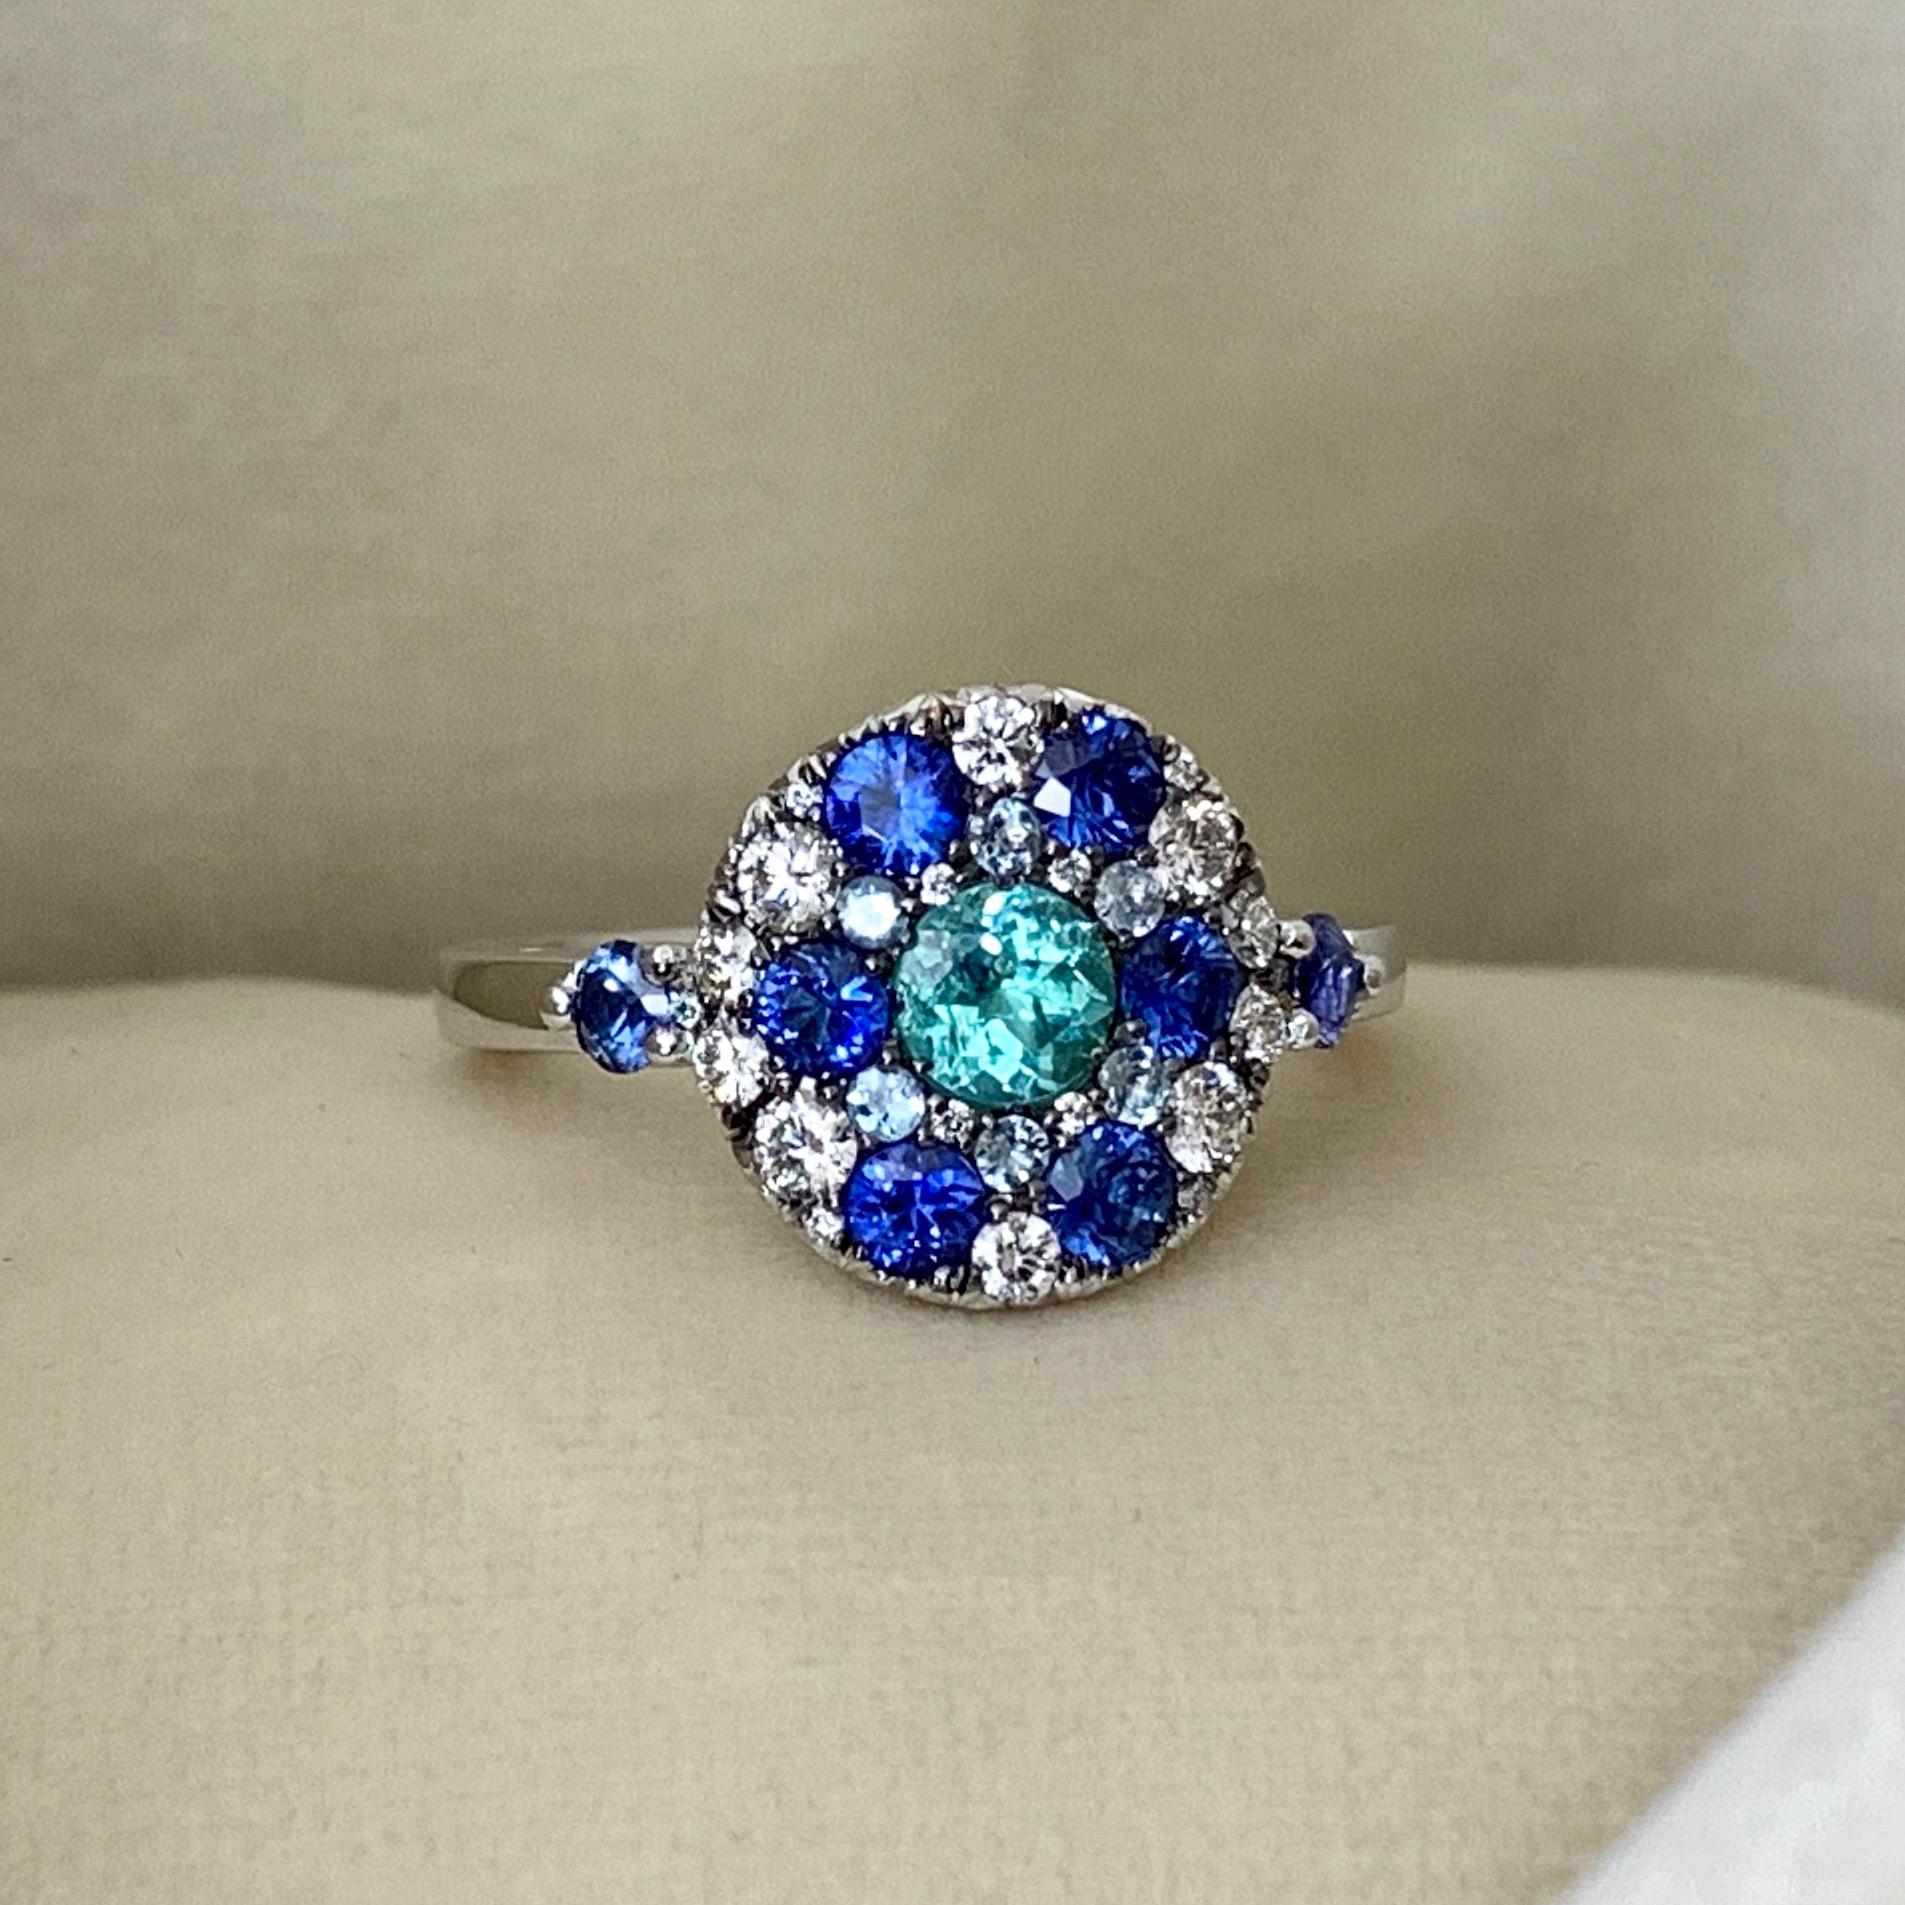 One of a kind ring handmade in Belgium from jewellery designer Joke Quick.  Handmade the traditional way, no casting or printing involved. The ring is made in 18K White gold 8,6 g. Set with a Paraiba Tourmaline centerstone 0,41 Carat.( no